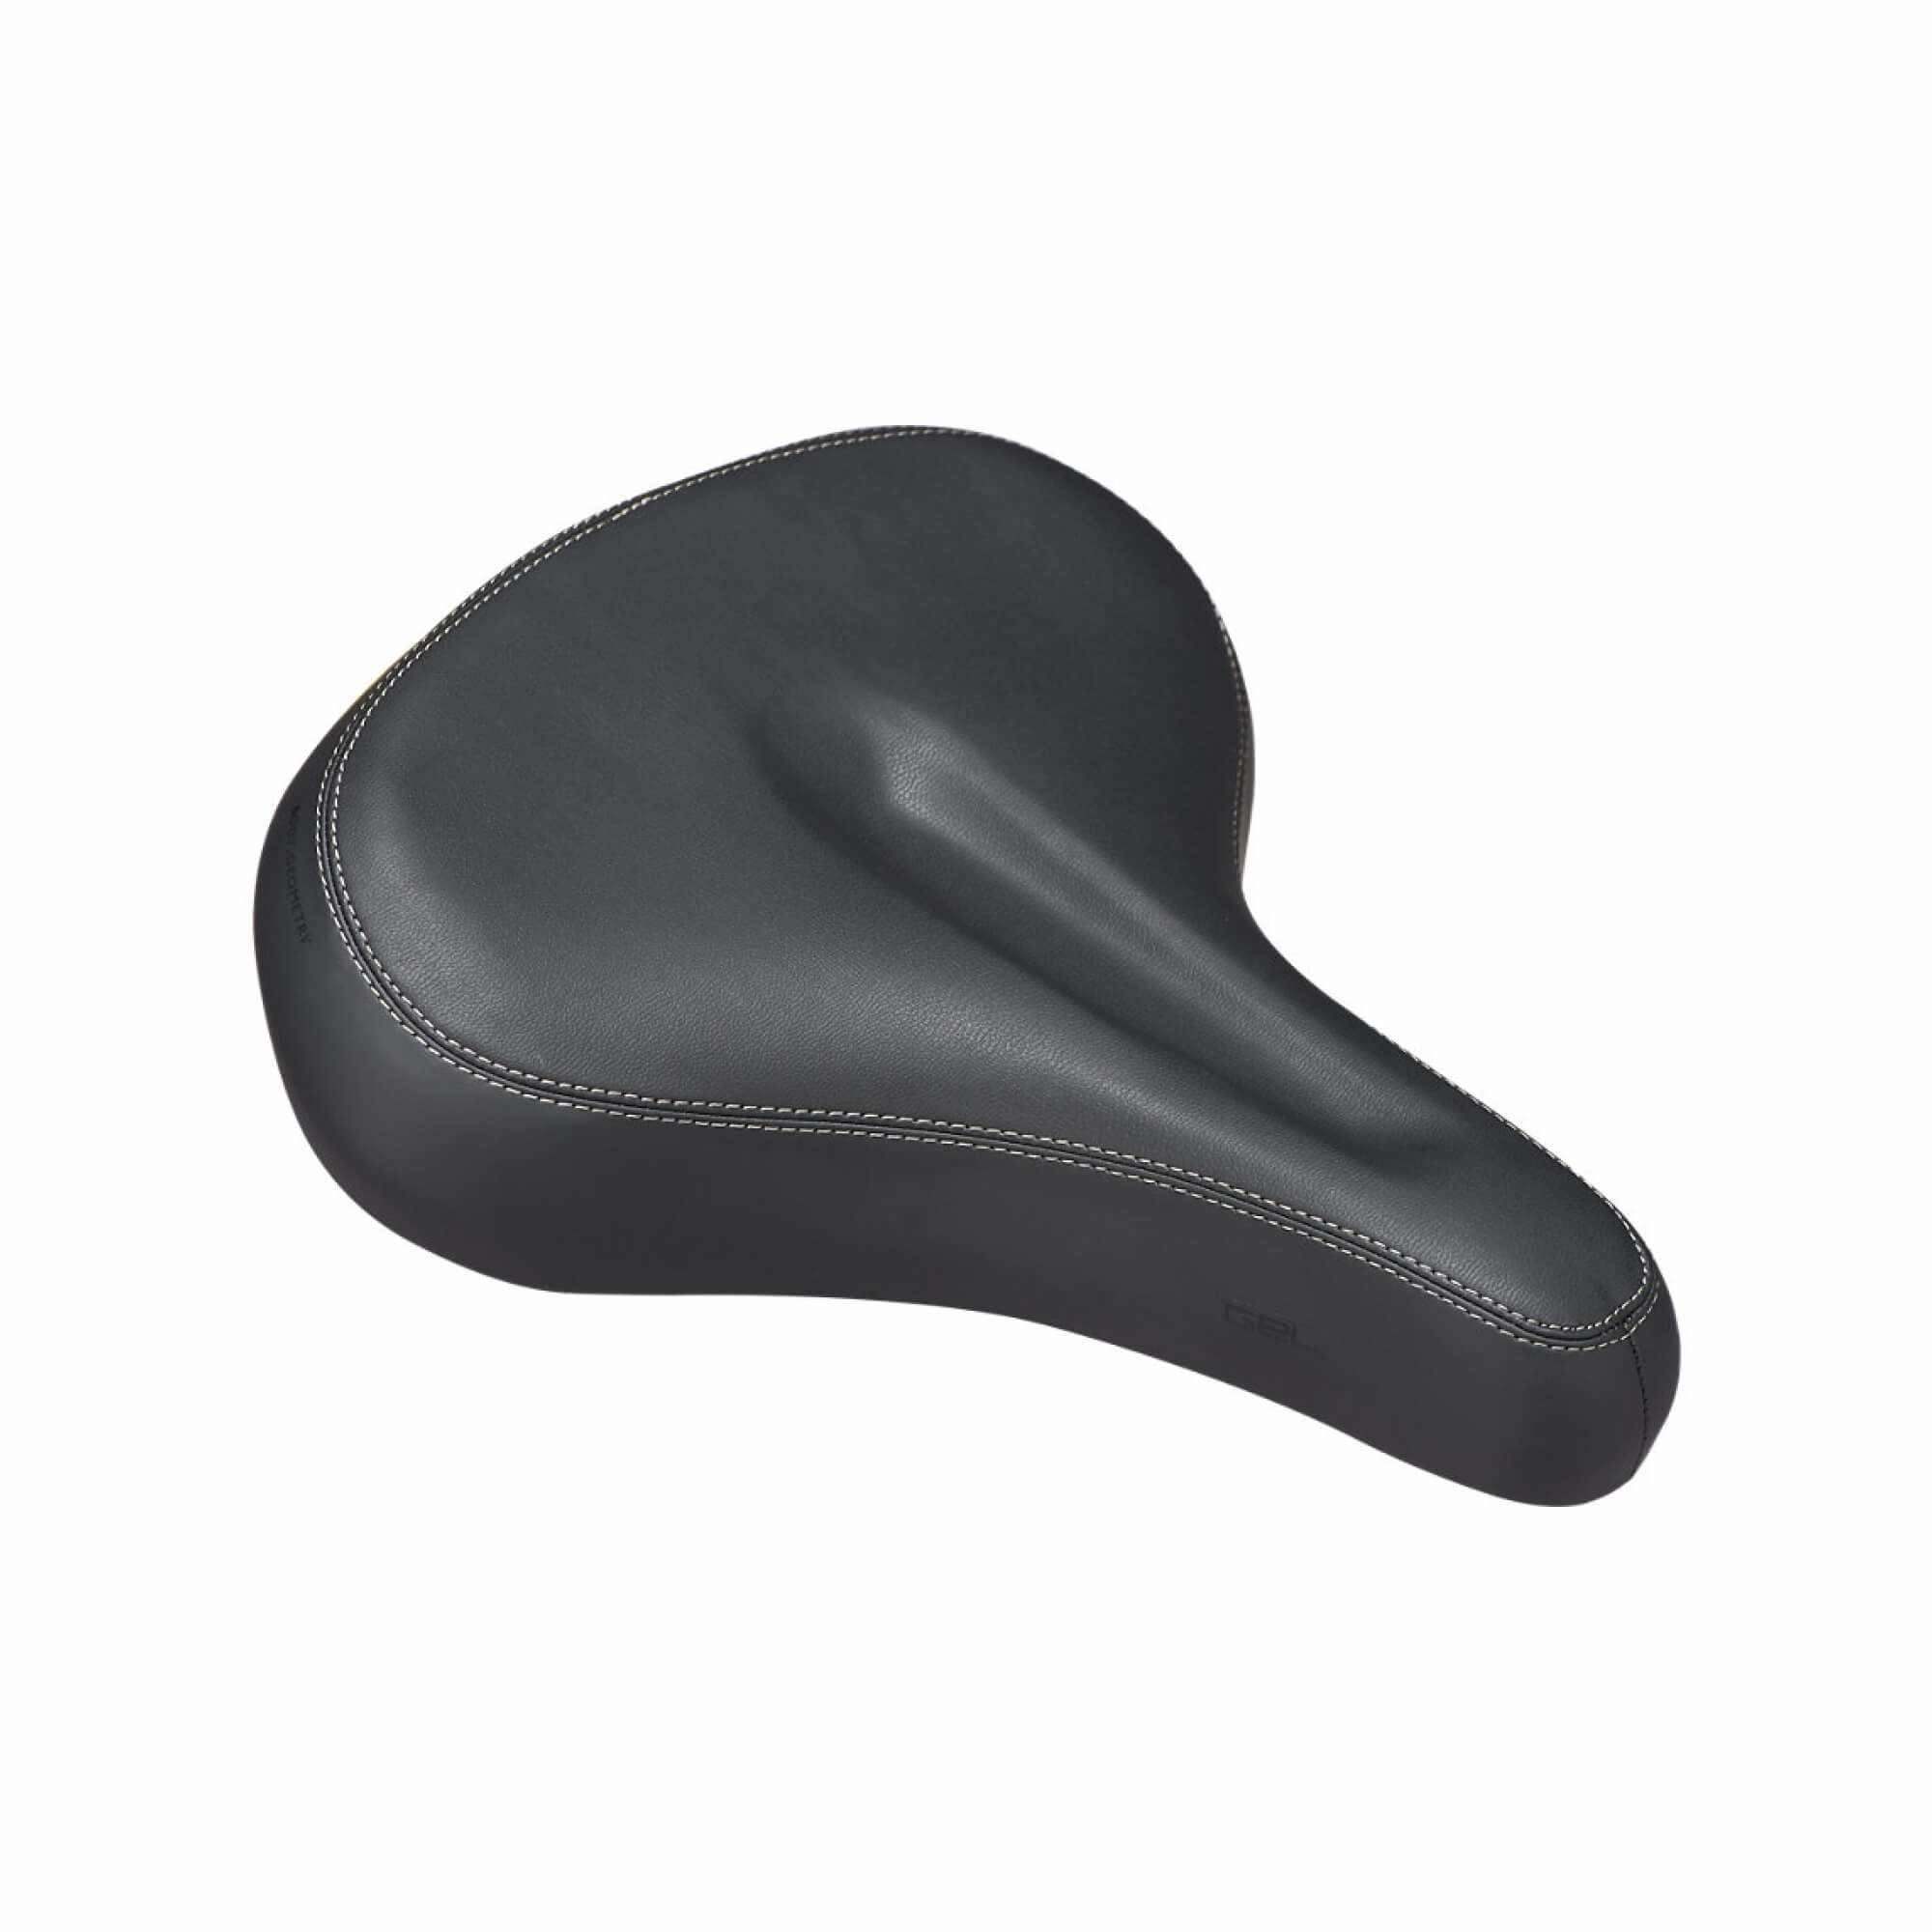 The Cup Gel Saddle-1